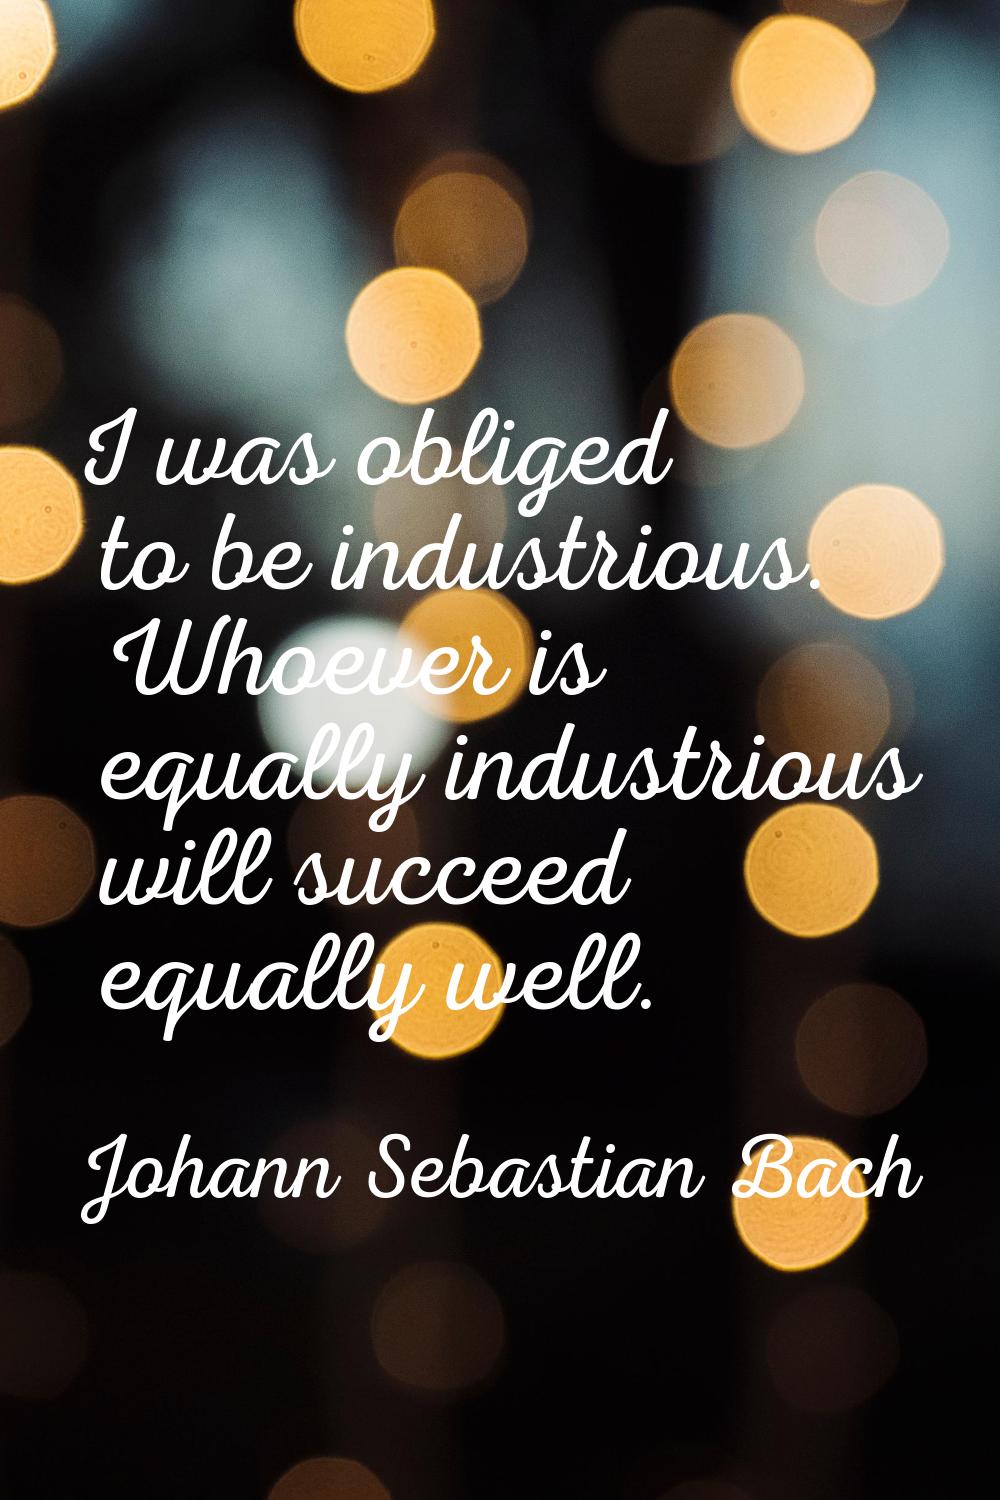 I was obliged to be industrious. Whoever is equally industrious will succeed equally well.